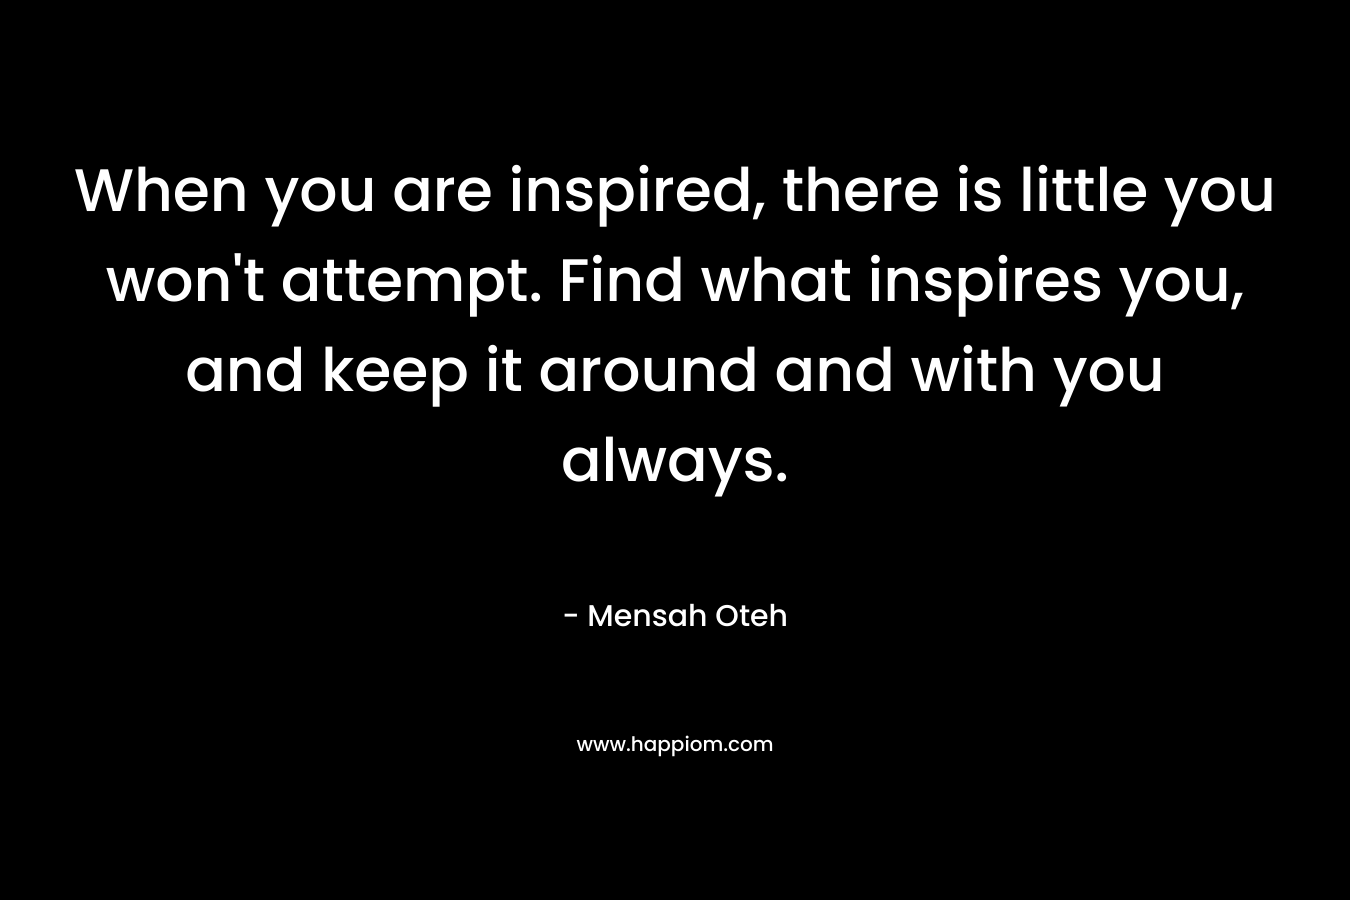 When you are inspired, there is little you won't attempt. Find what inspires you, and keep it around and with you always.